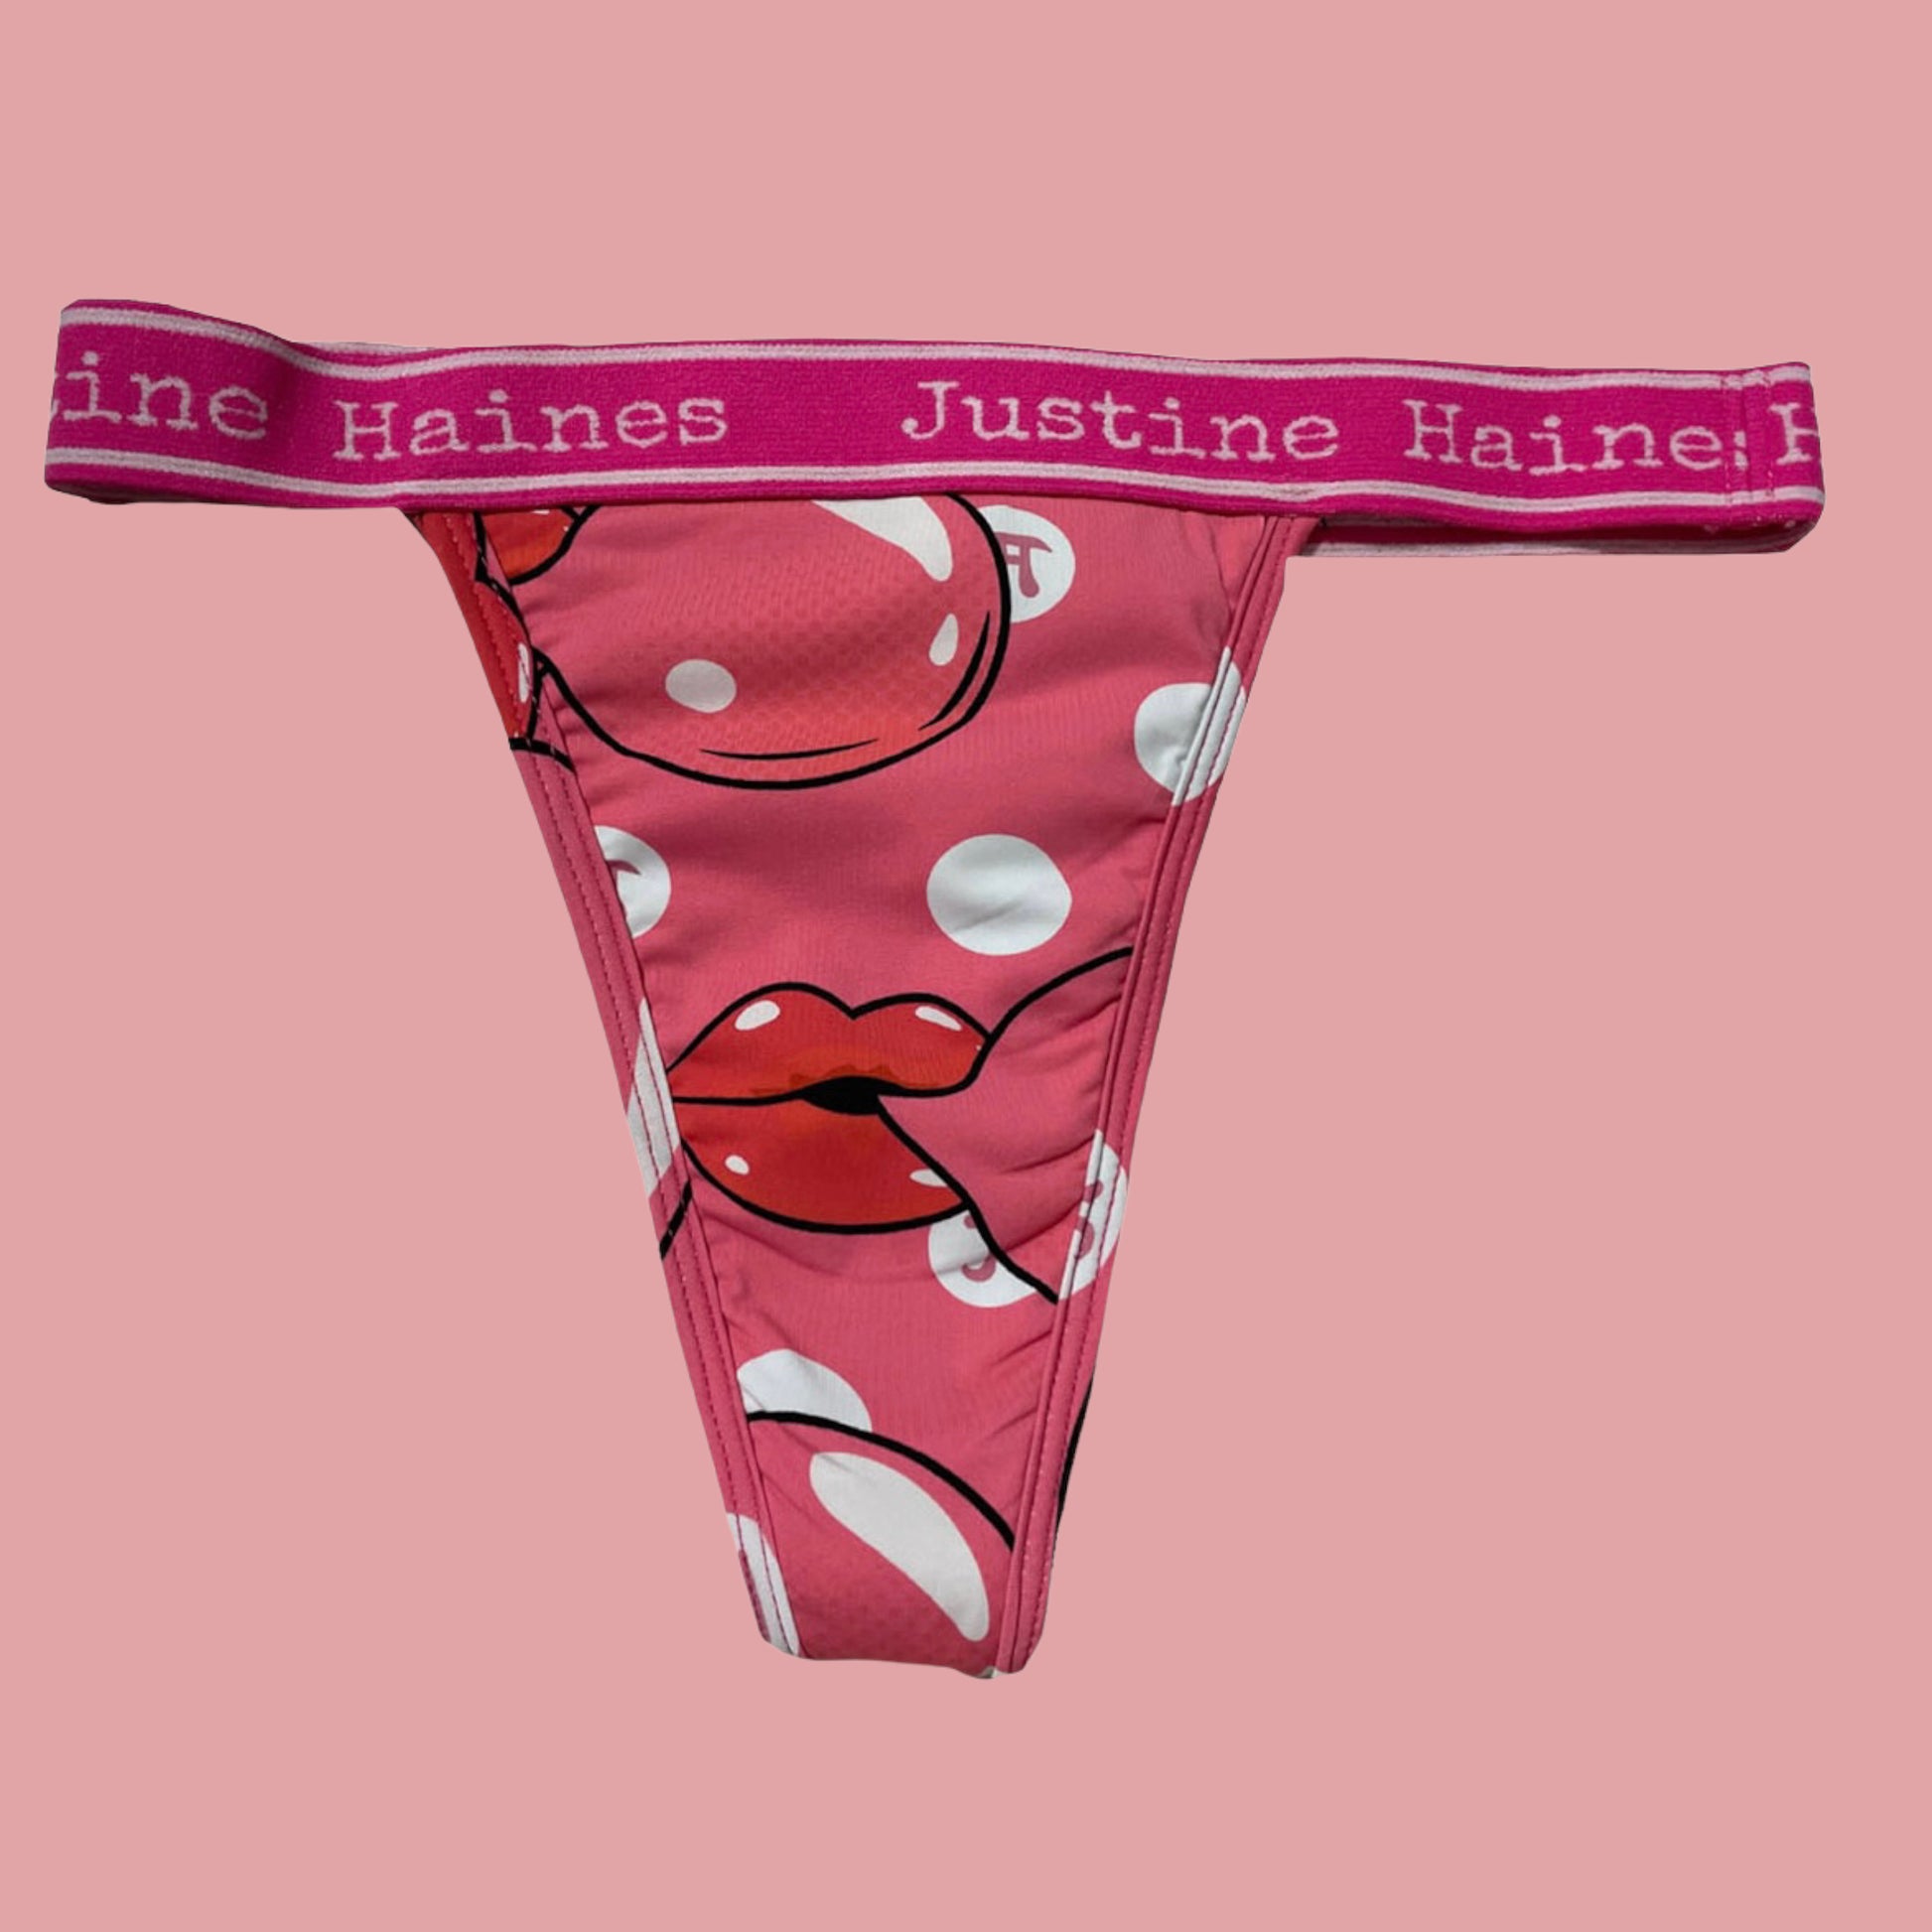 https://www.justinehaines.com/products/wear-thongs-on-your-period-pink-bubble-gum